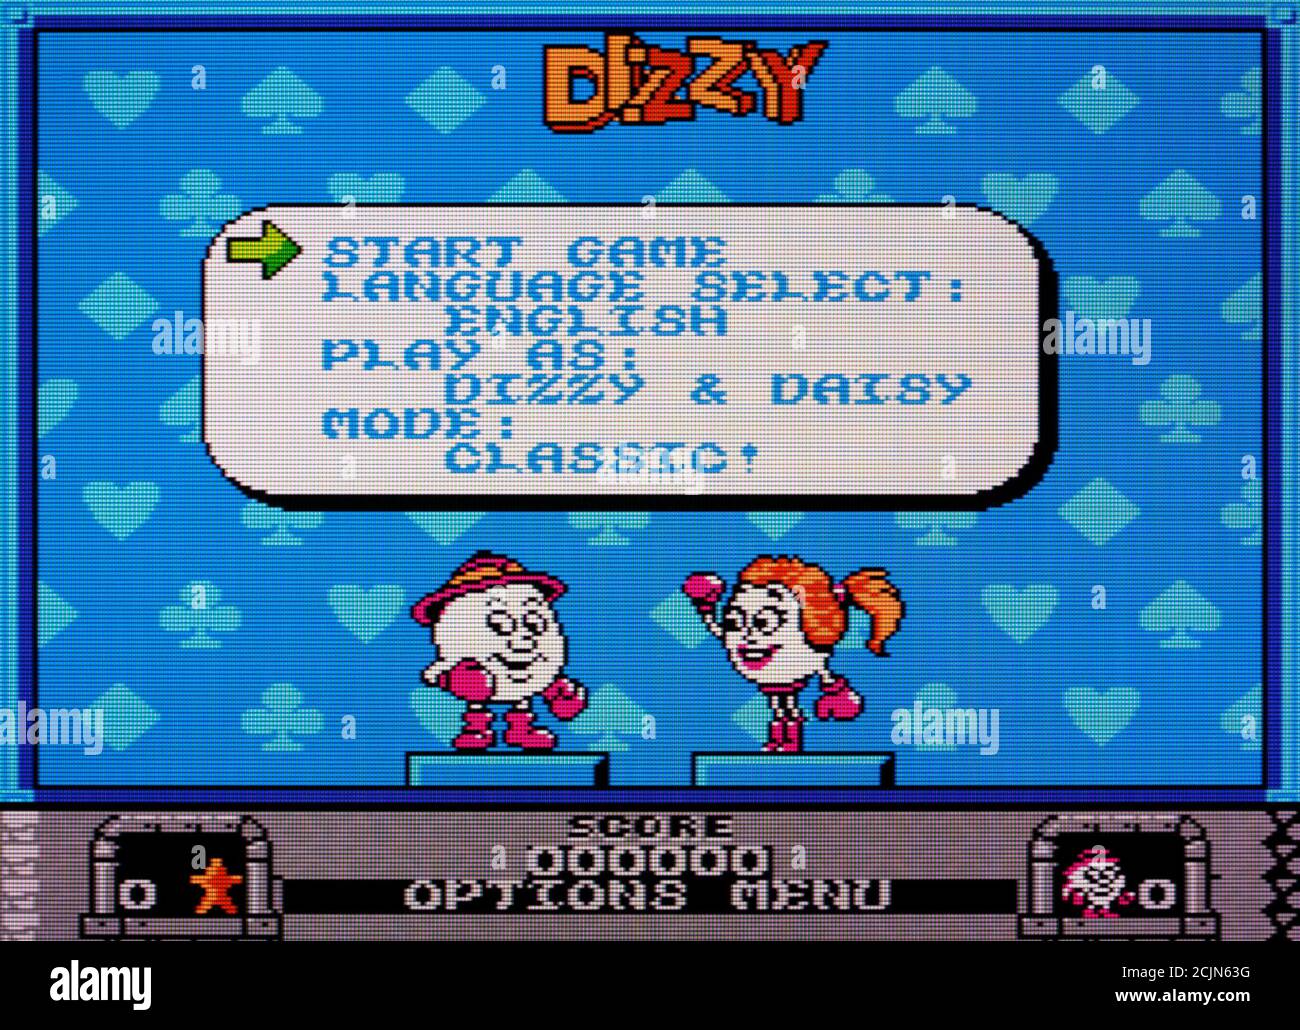 Dizzy - Nintendo Entertainment System - NES Videogame - Editorial use only Stock Photo